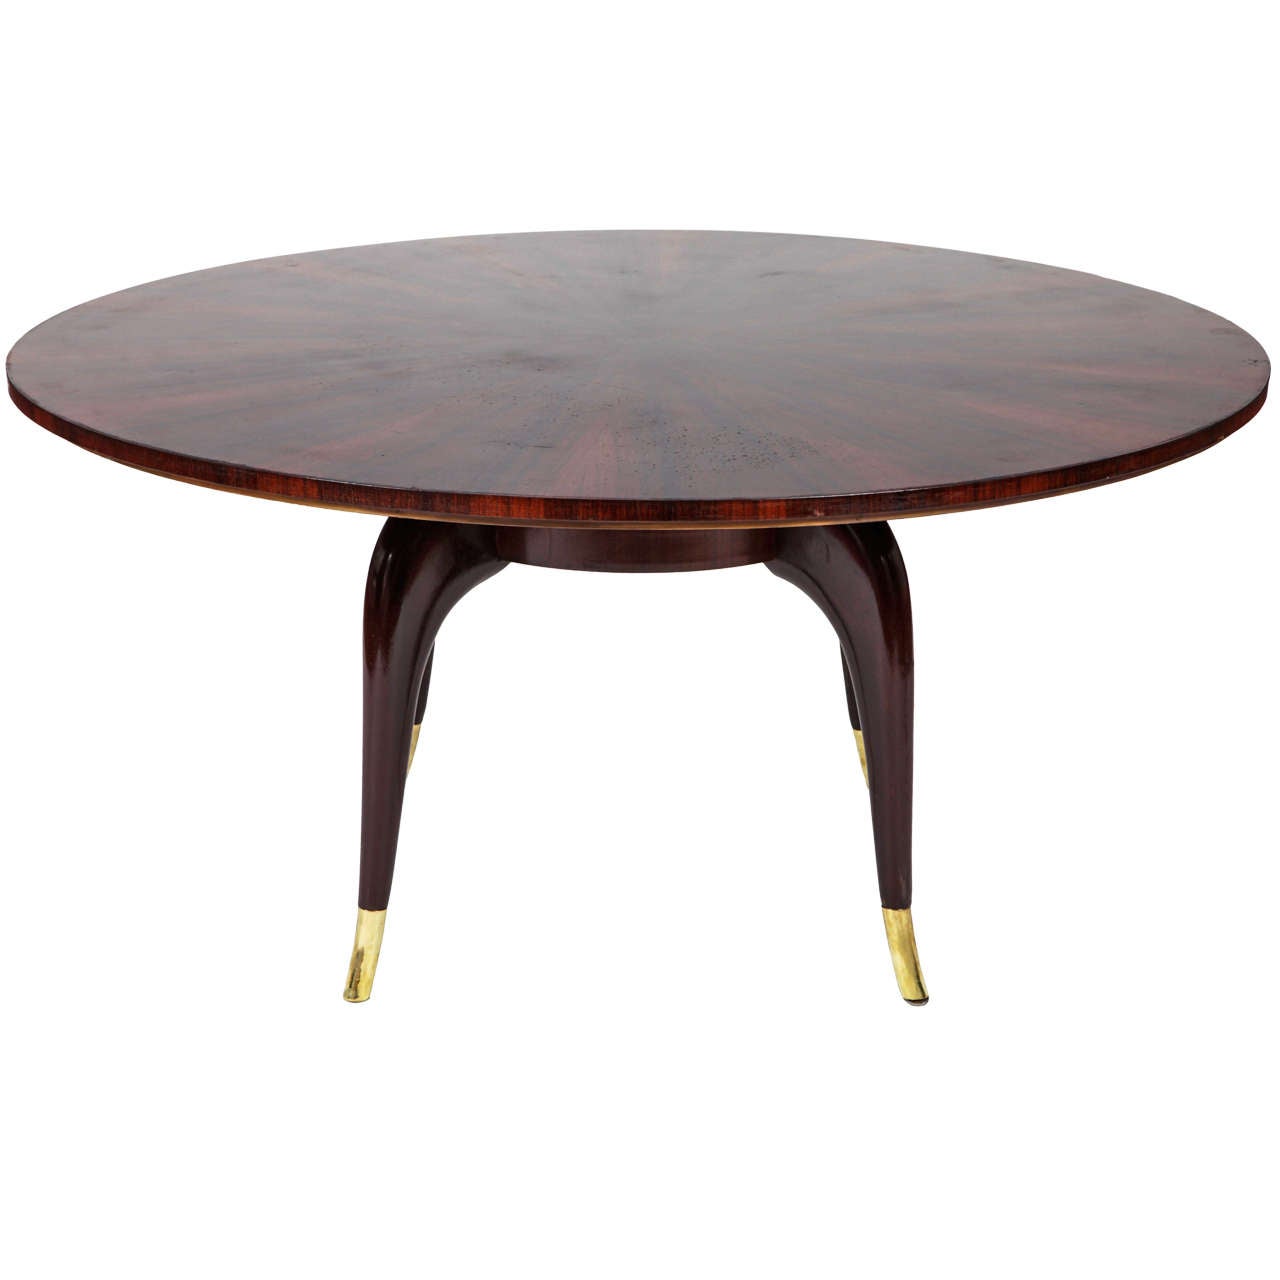 Italian Rare Large Round Mahogany Coffee Table Attributed to Paolo Buffa, 1940 For Sale